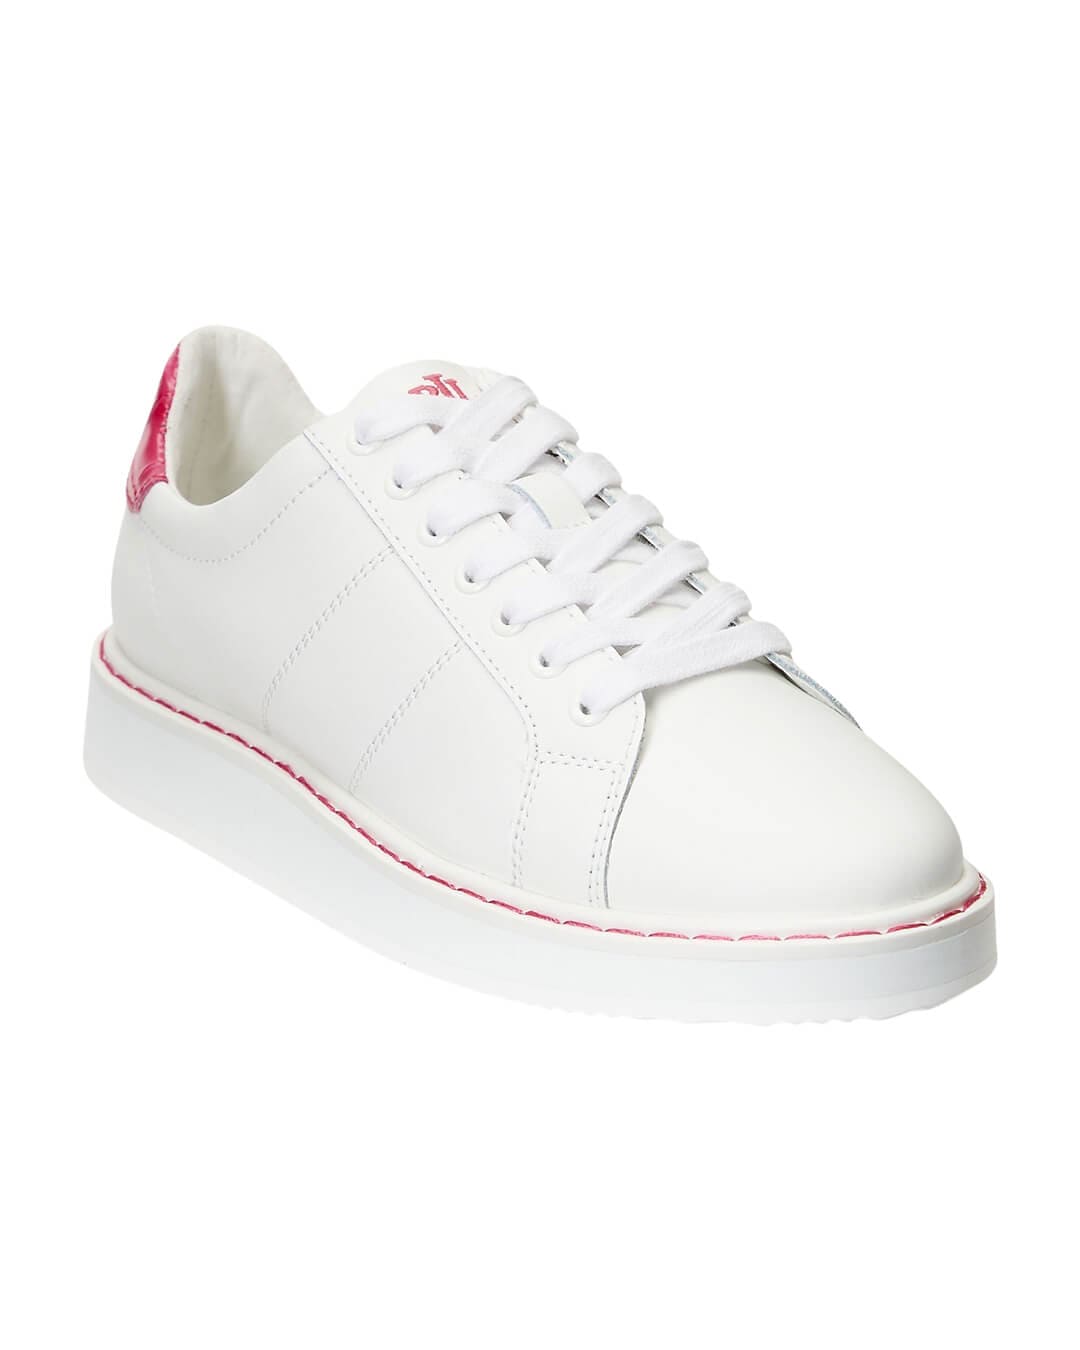 Lauren By Ralph Lauren Shoes Lauren By Ralph Lauren Angeline White And Pink Sneakers